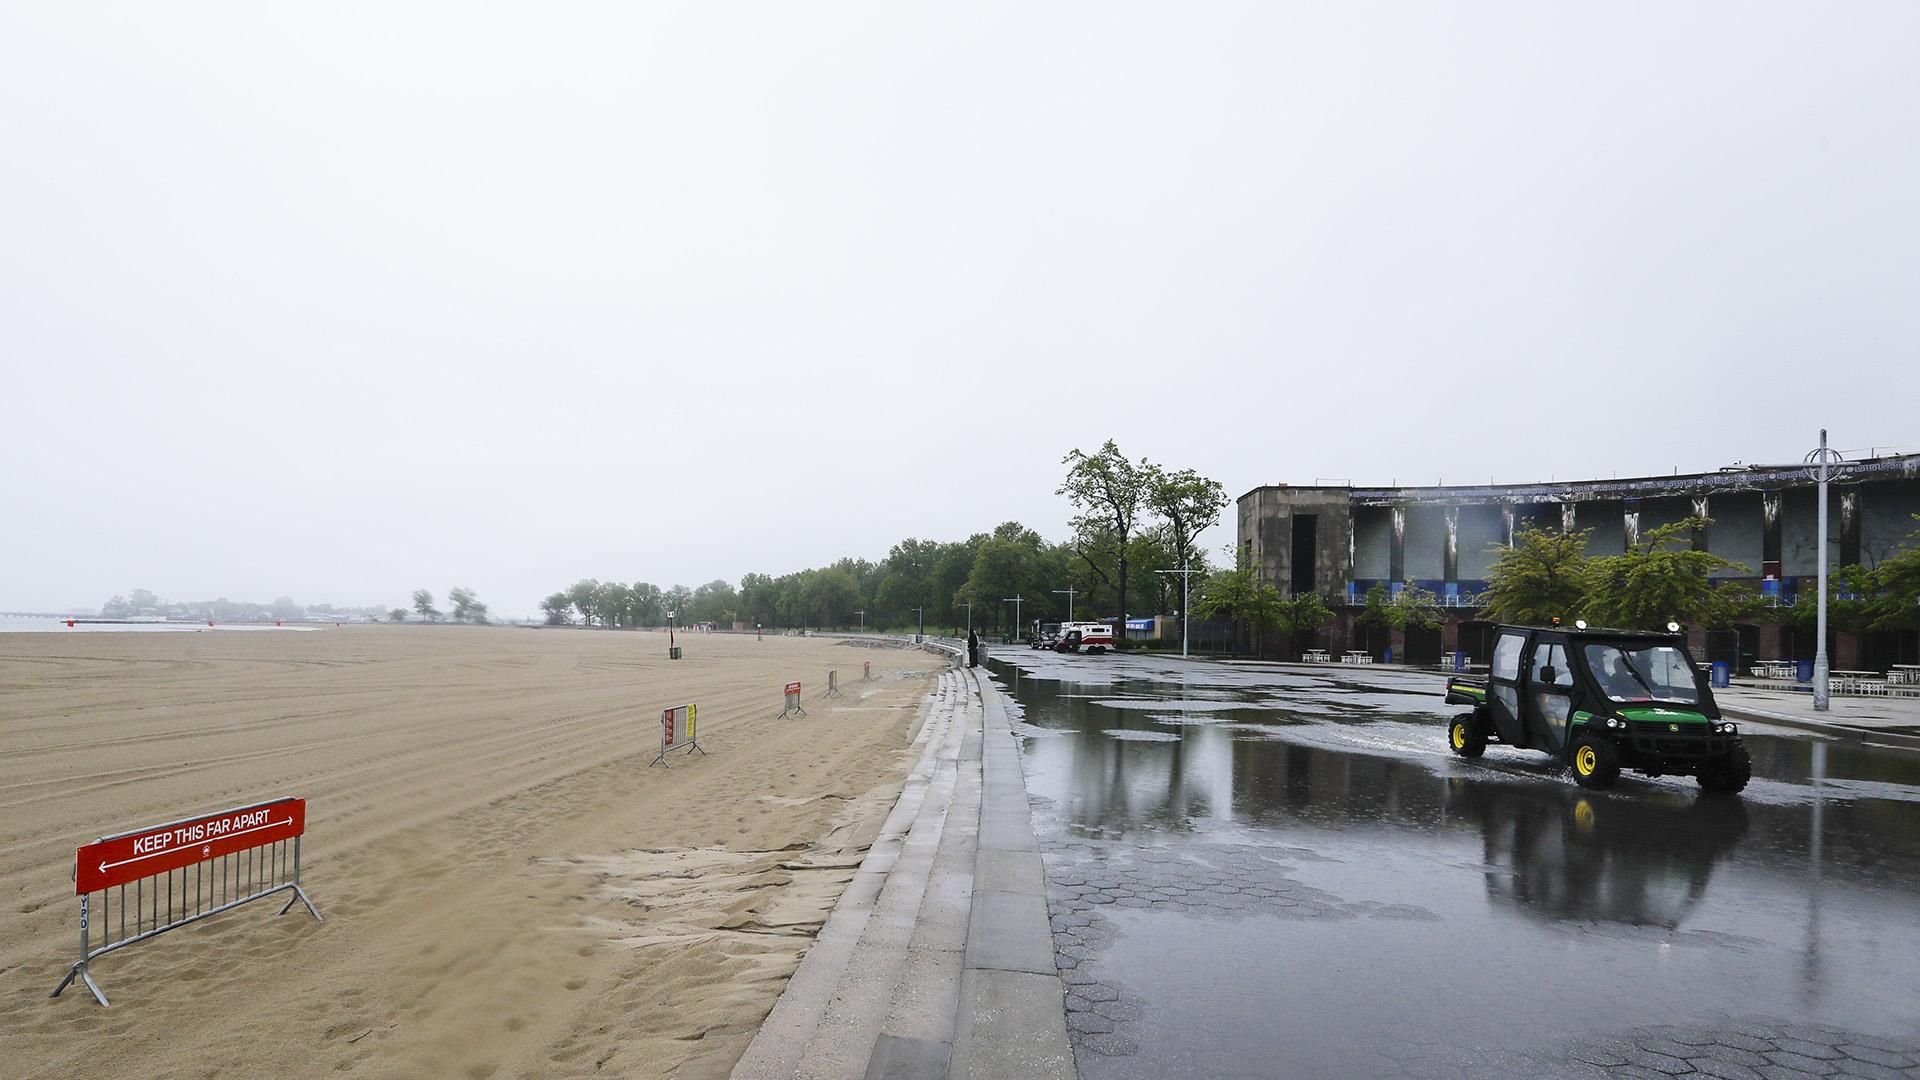 New York City Parks officials work at an empty Orchard Beach Saturday, May 23, 2020, in the Bronx borough of New York. (AP Photo / Frank Franklin II)